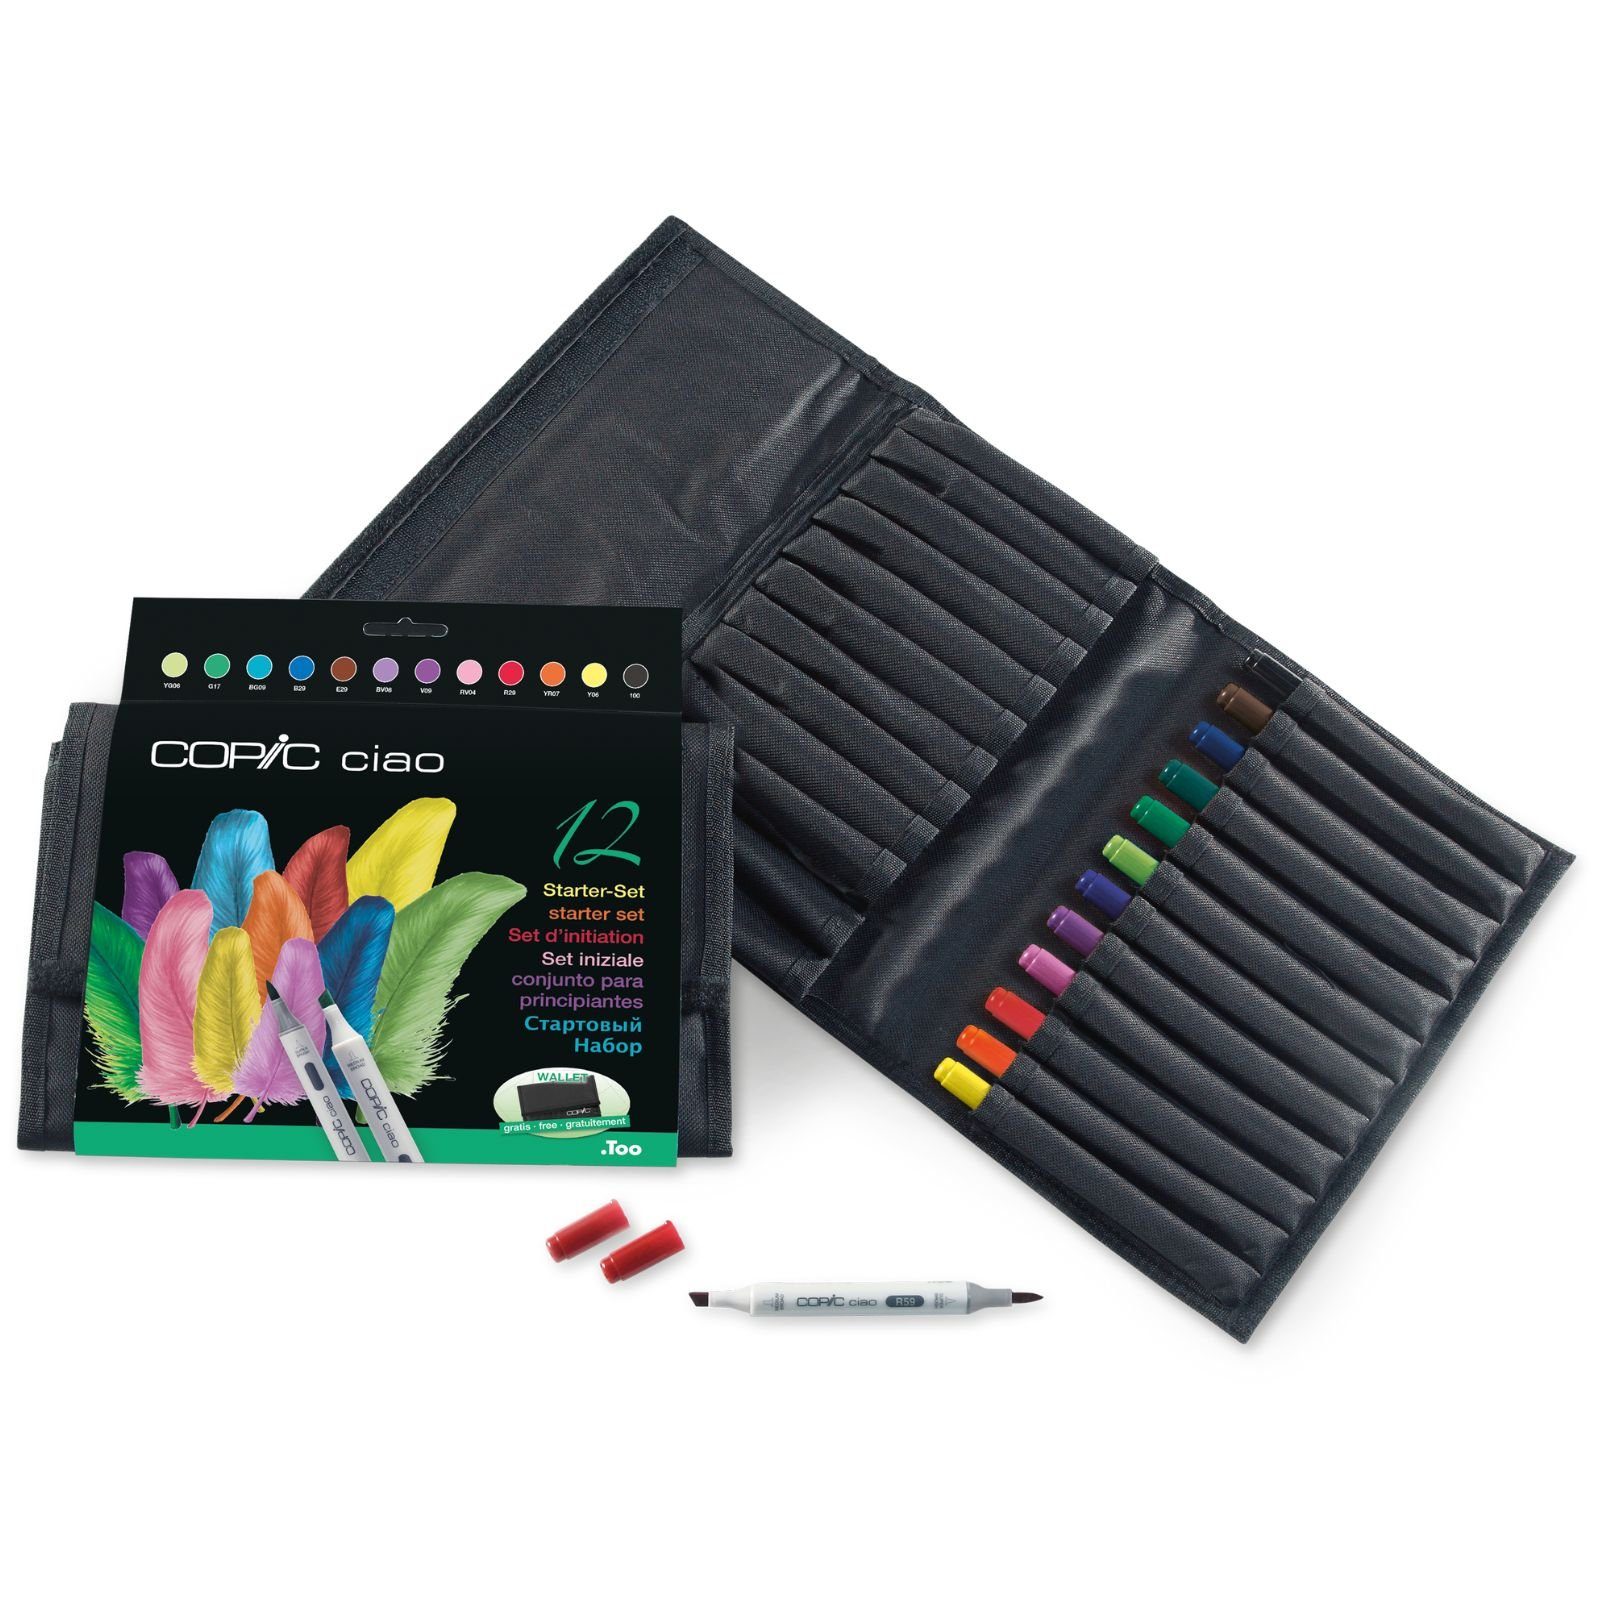 - Marker Starter COPIC Copic Ciao Wallet COPIC 12er